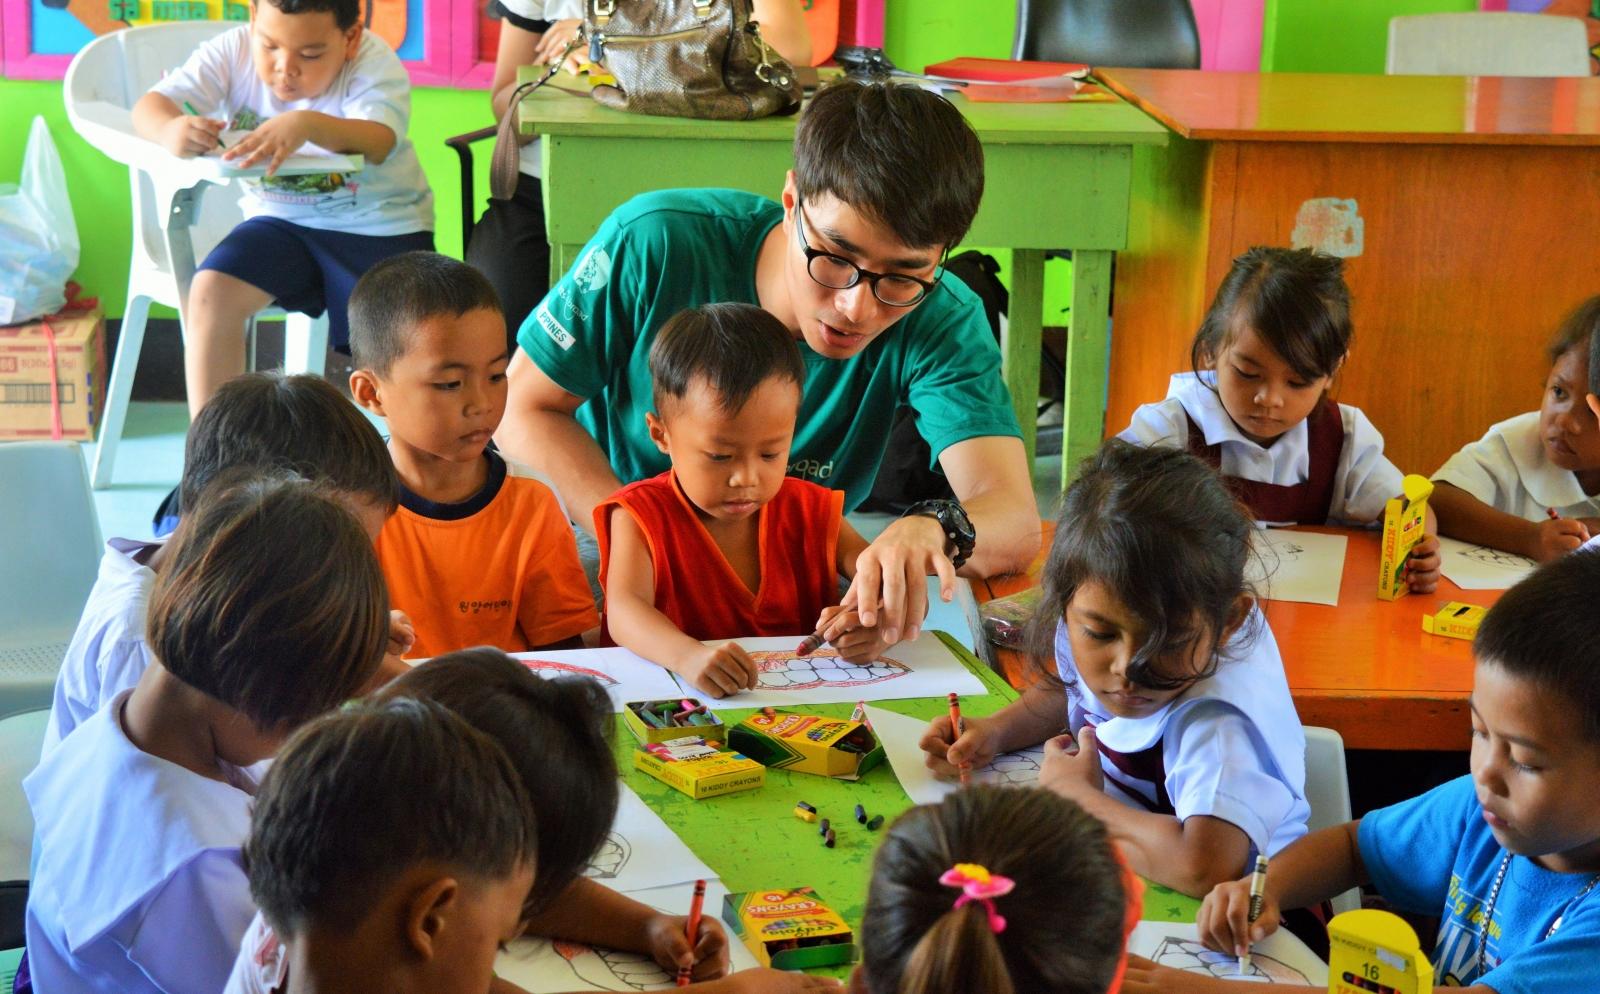 A volunteer in the Philippines helps a child in the classroom as part of his service learning trip abroad